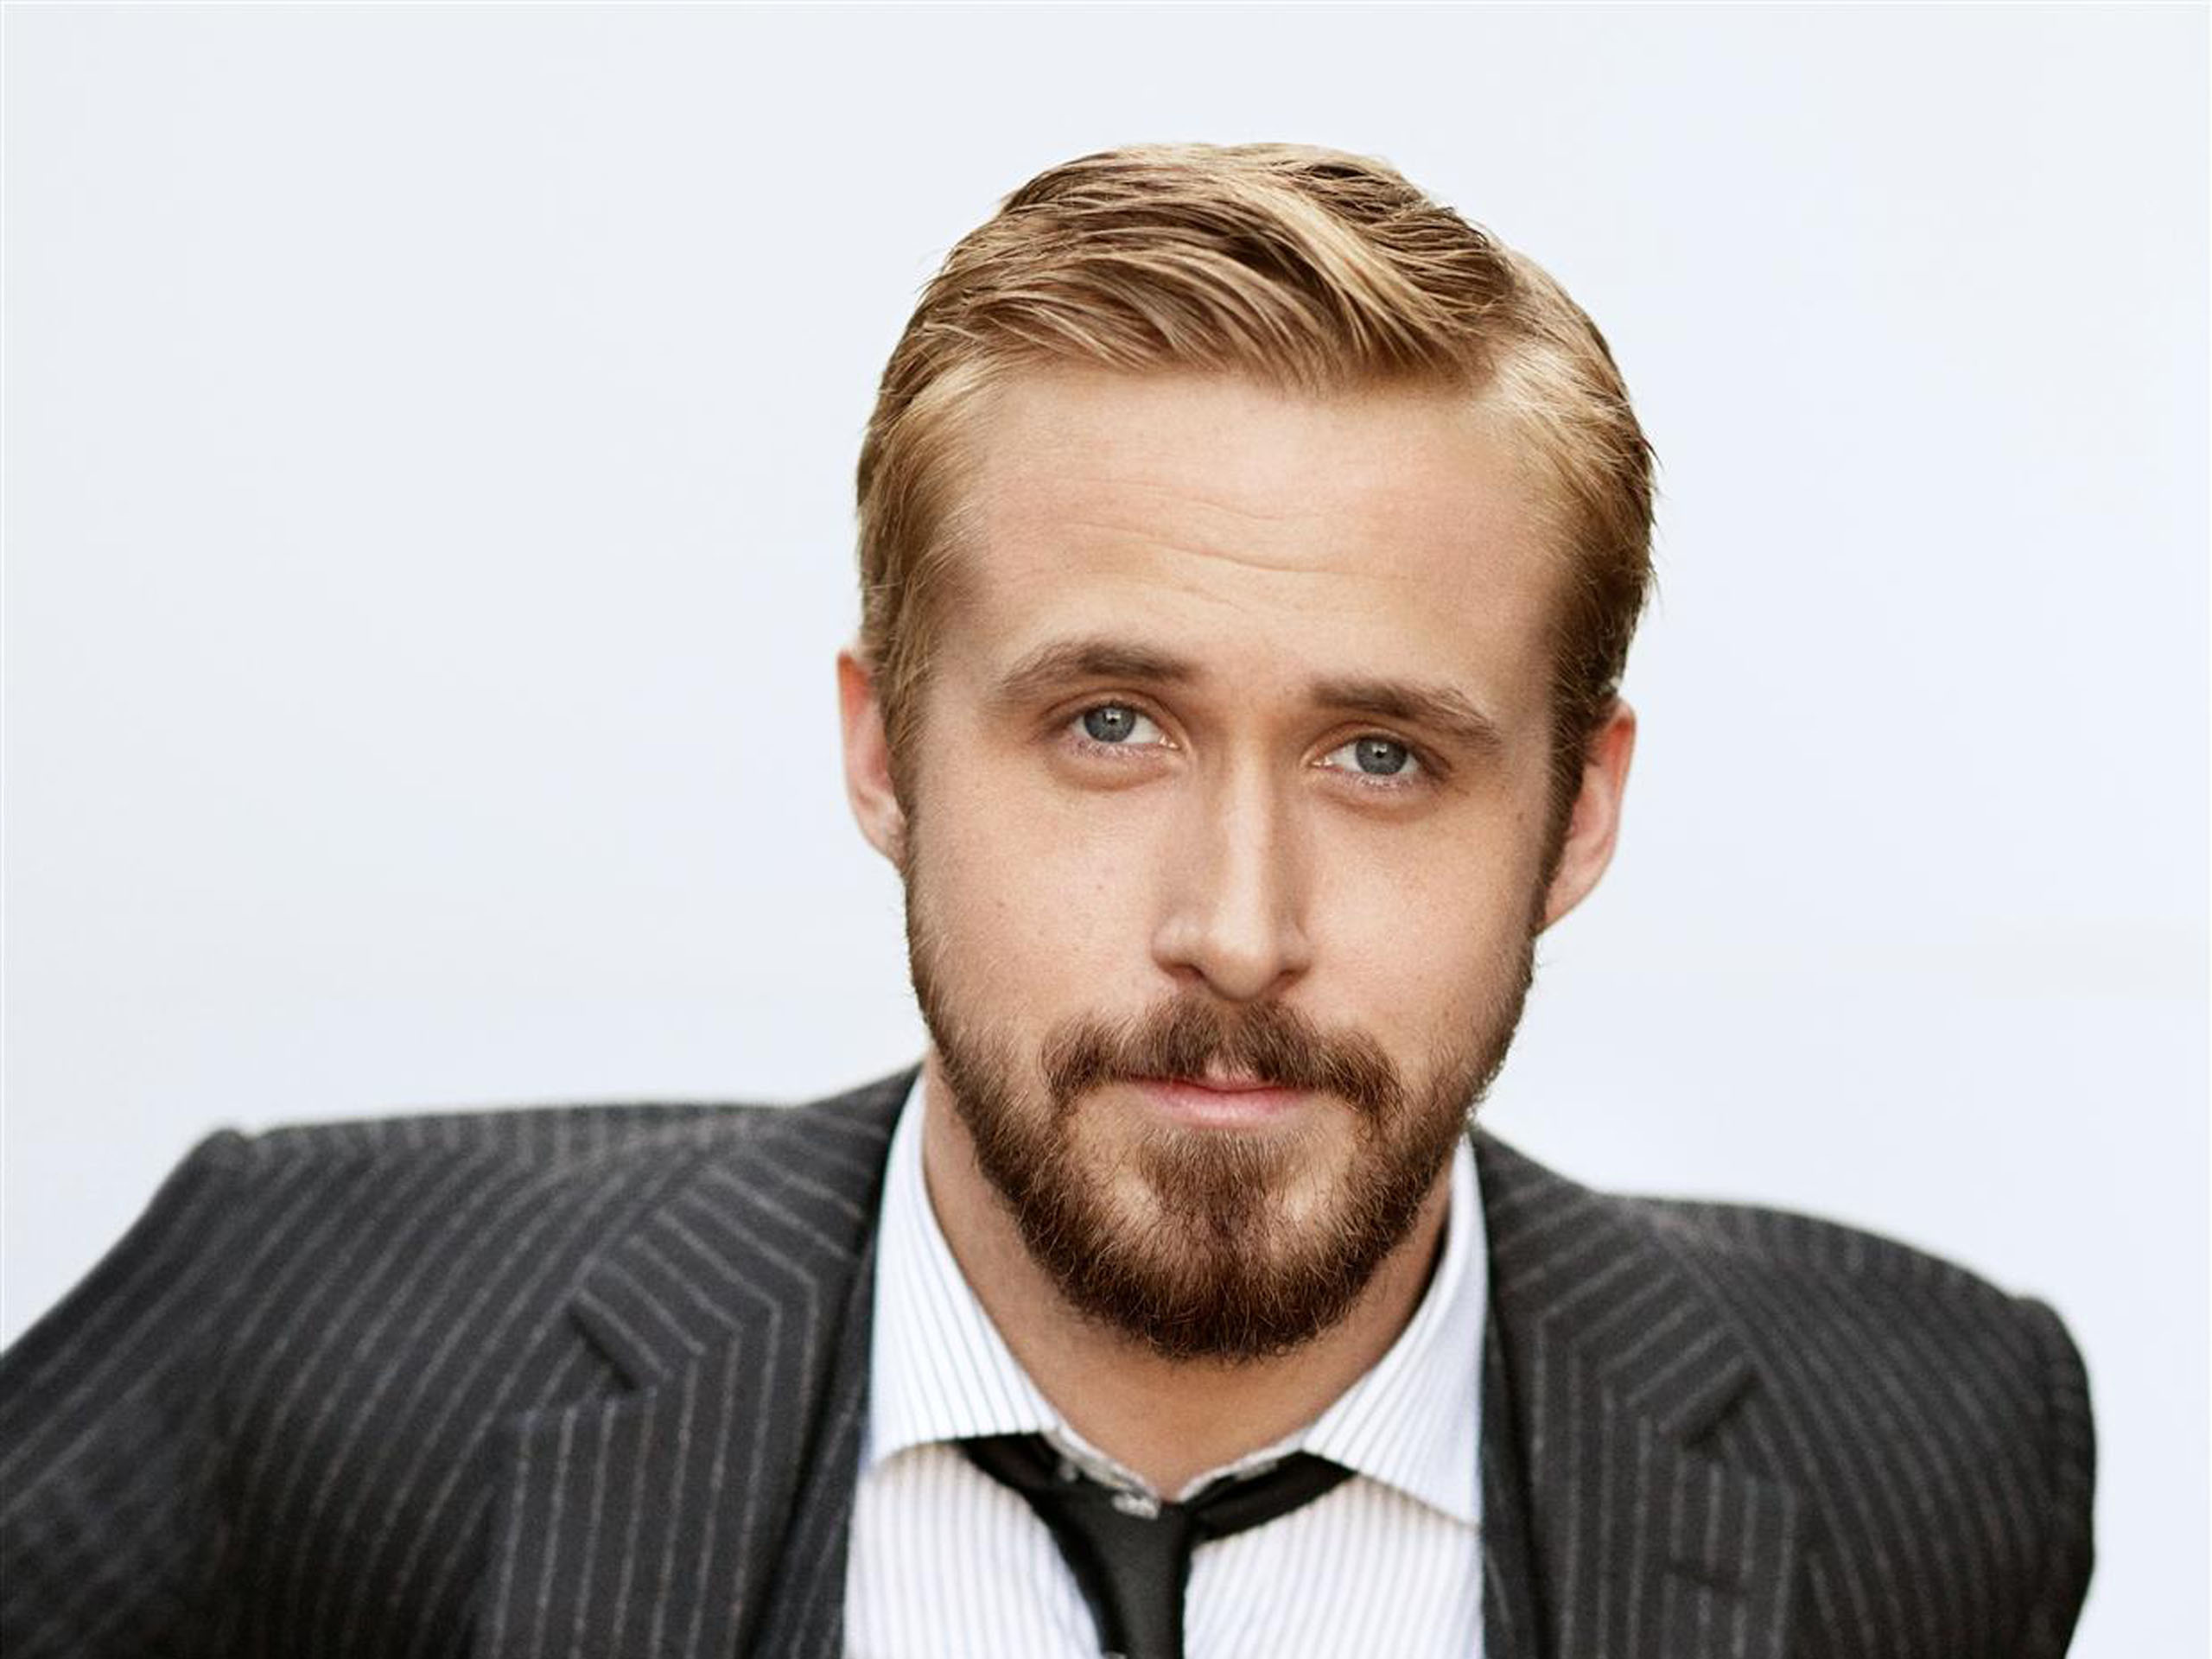 Overview of the career and roles of actor Ryan Gosling